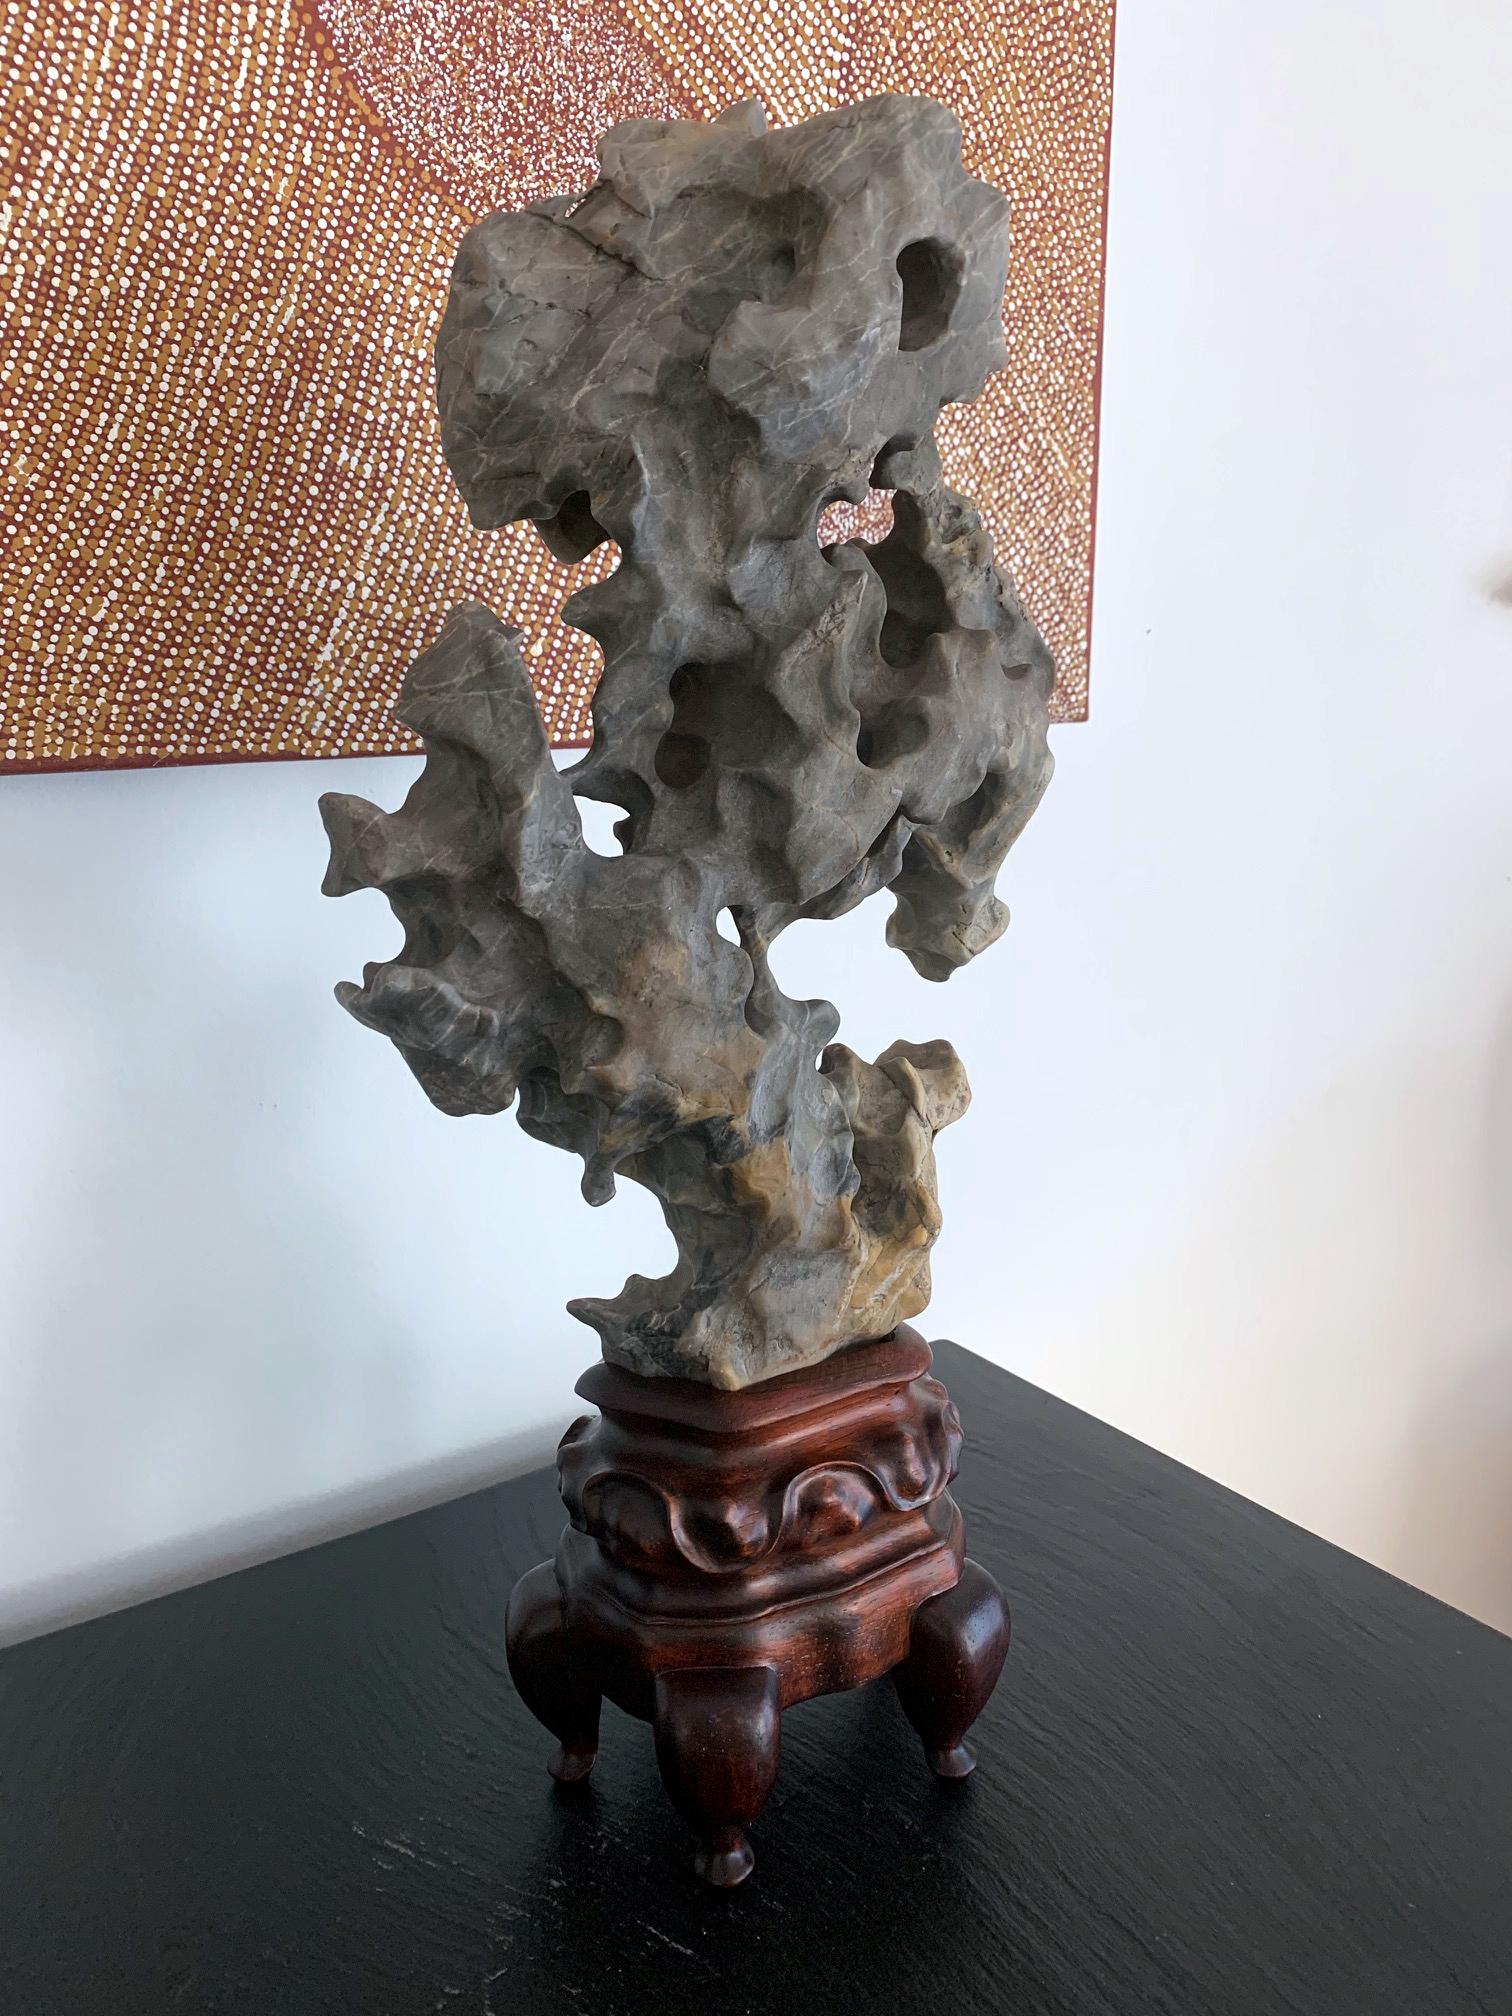 An elegant Taihu scholar rock balanced on a custom wood stand, in a mushroom cloud form and full of grottoes. The weather-smoothed surface is of a whitish grey color and is interspersed with white veins and yellow calcification, in a most artistic